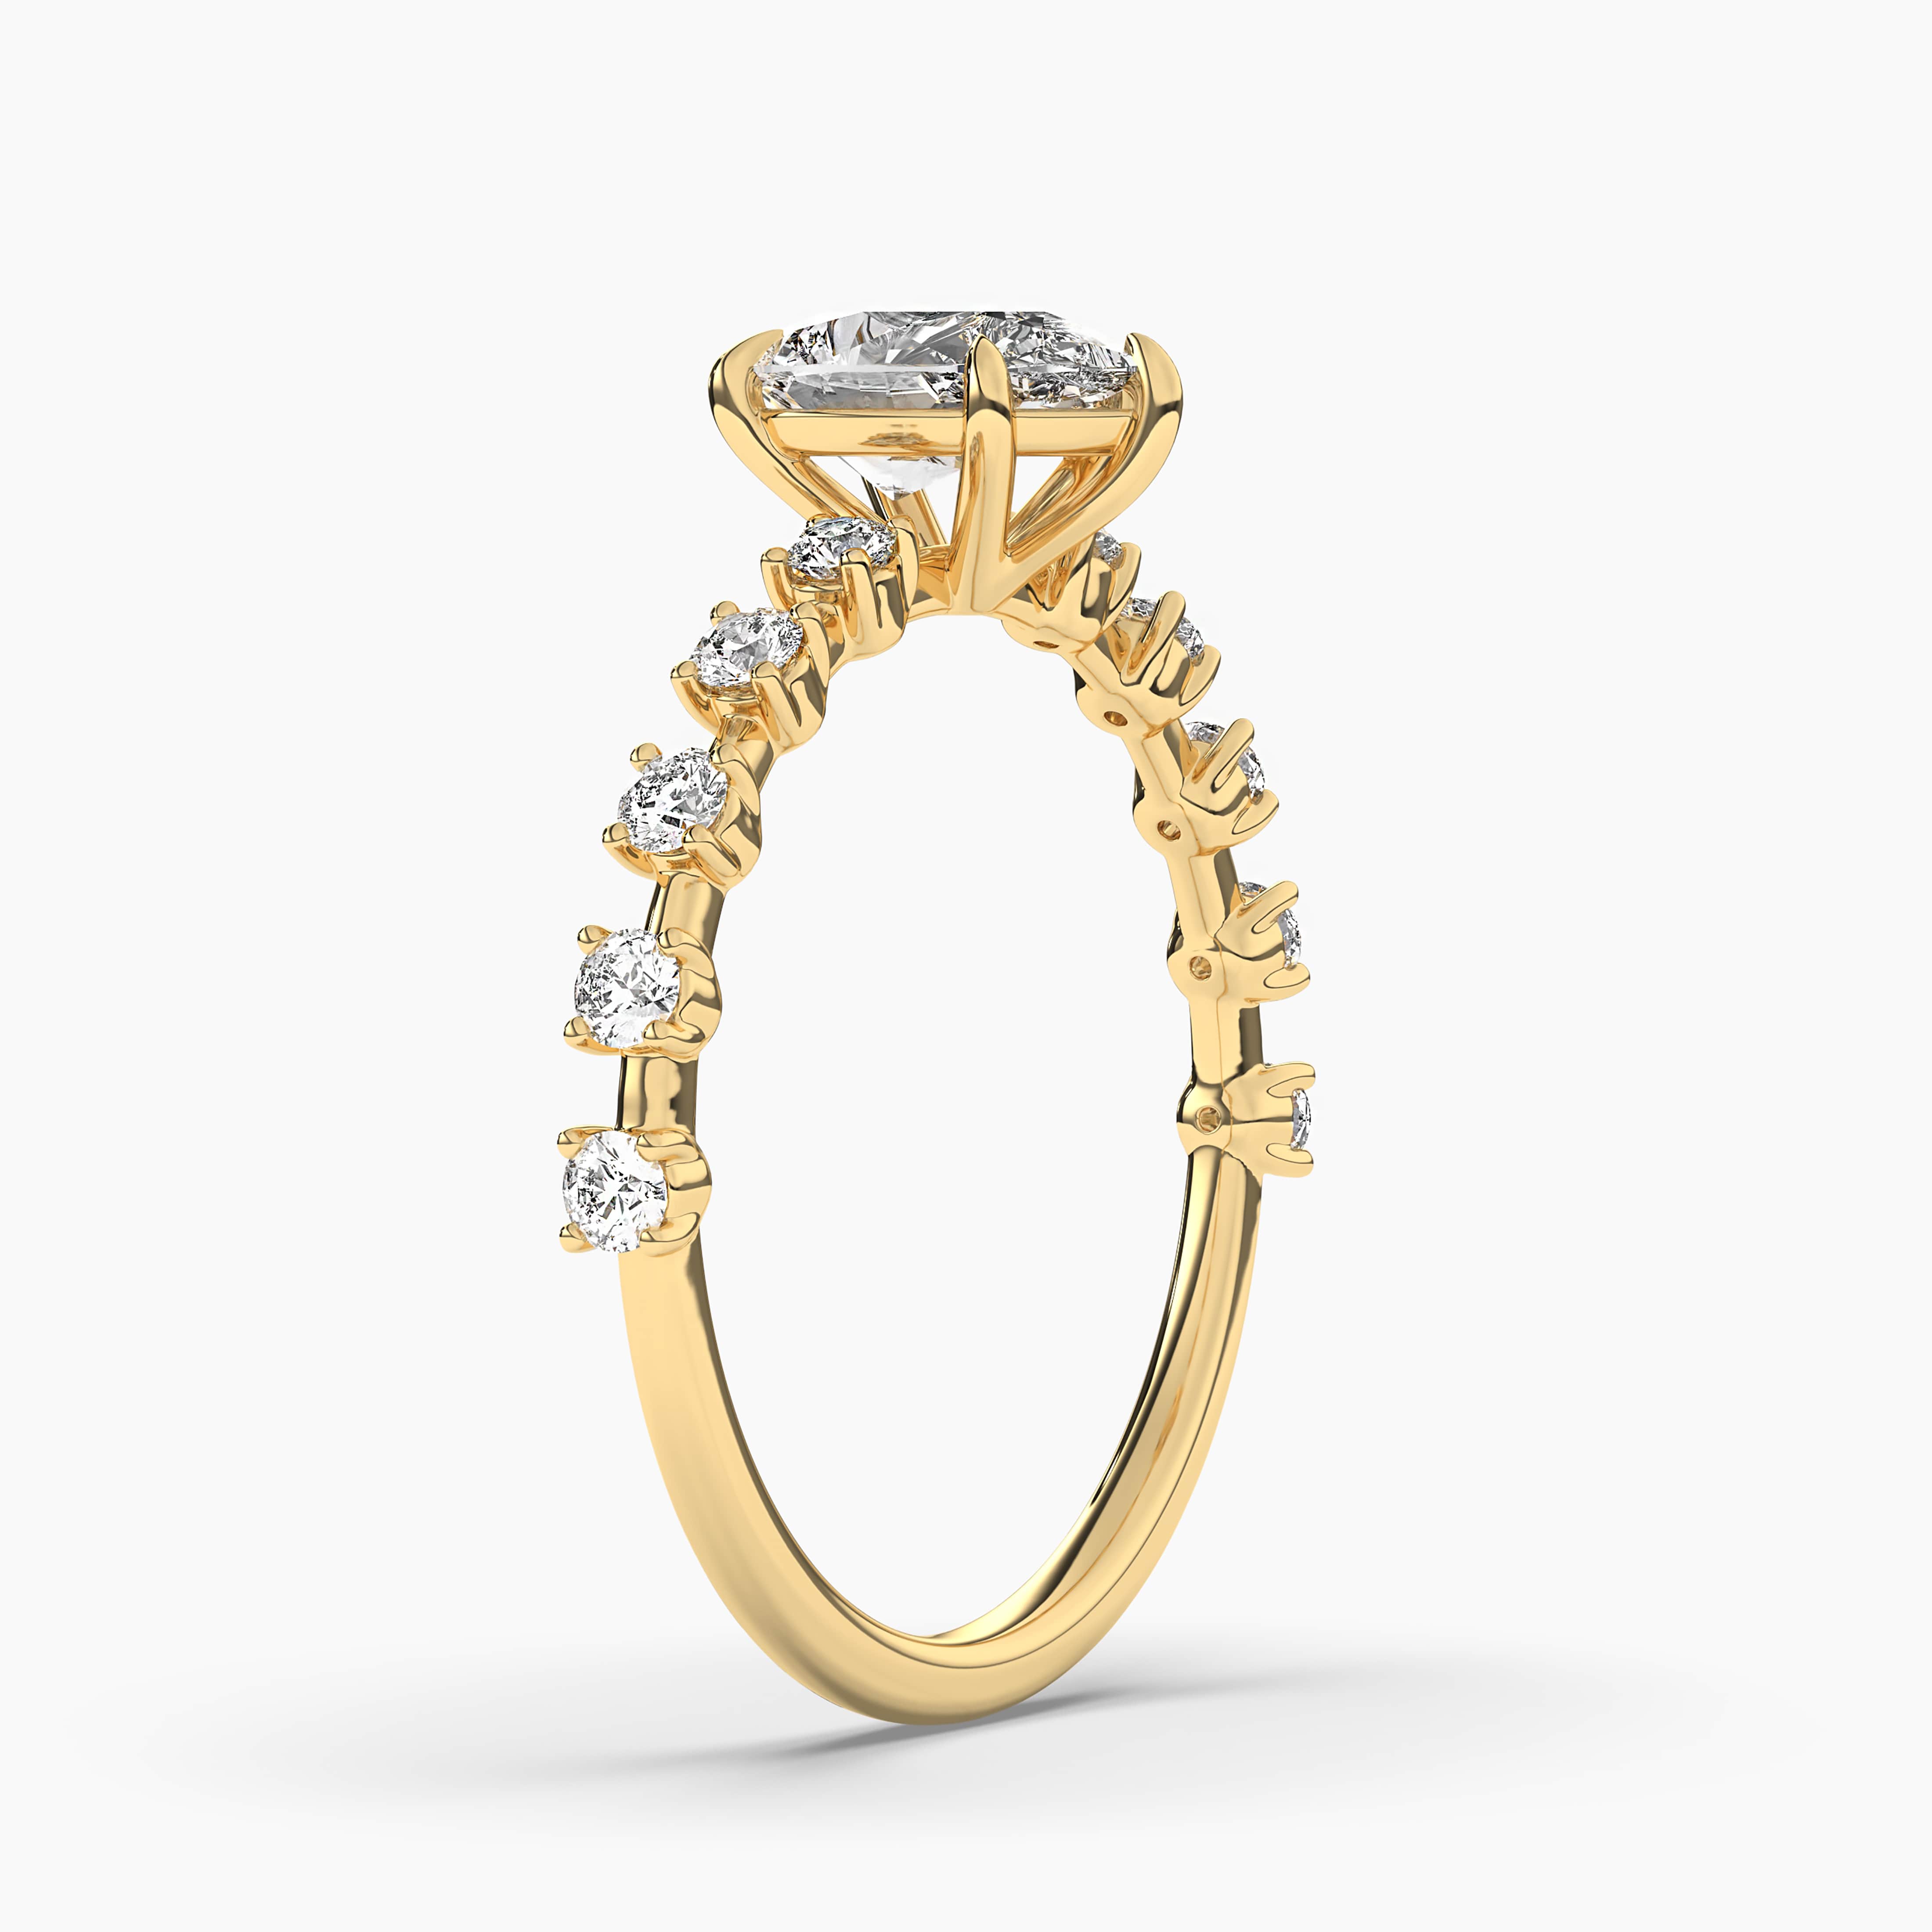 3.00carat Pear Shape Diamond Wrap Engagement Ring with Side Stone